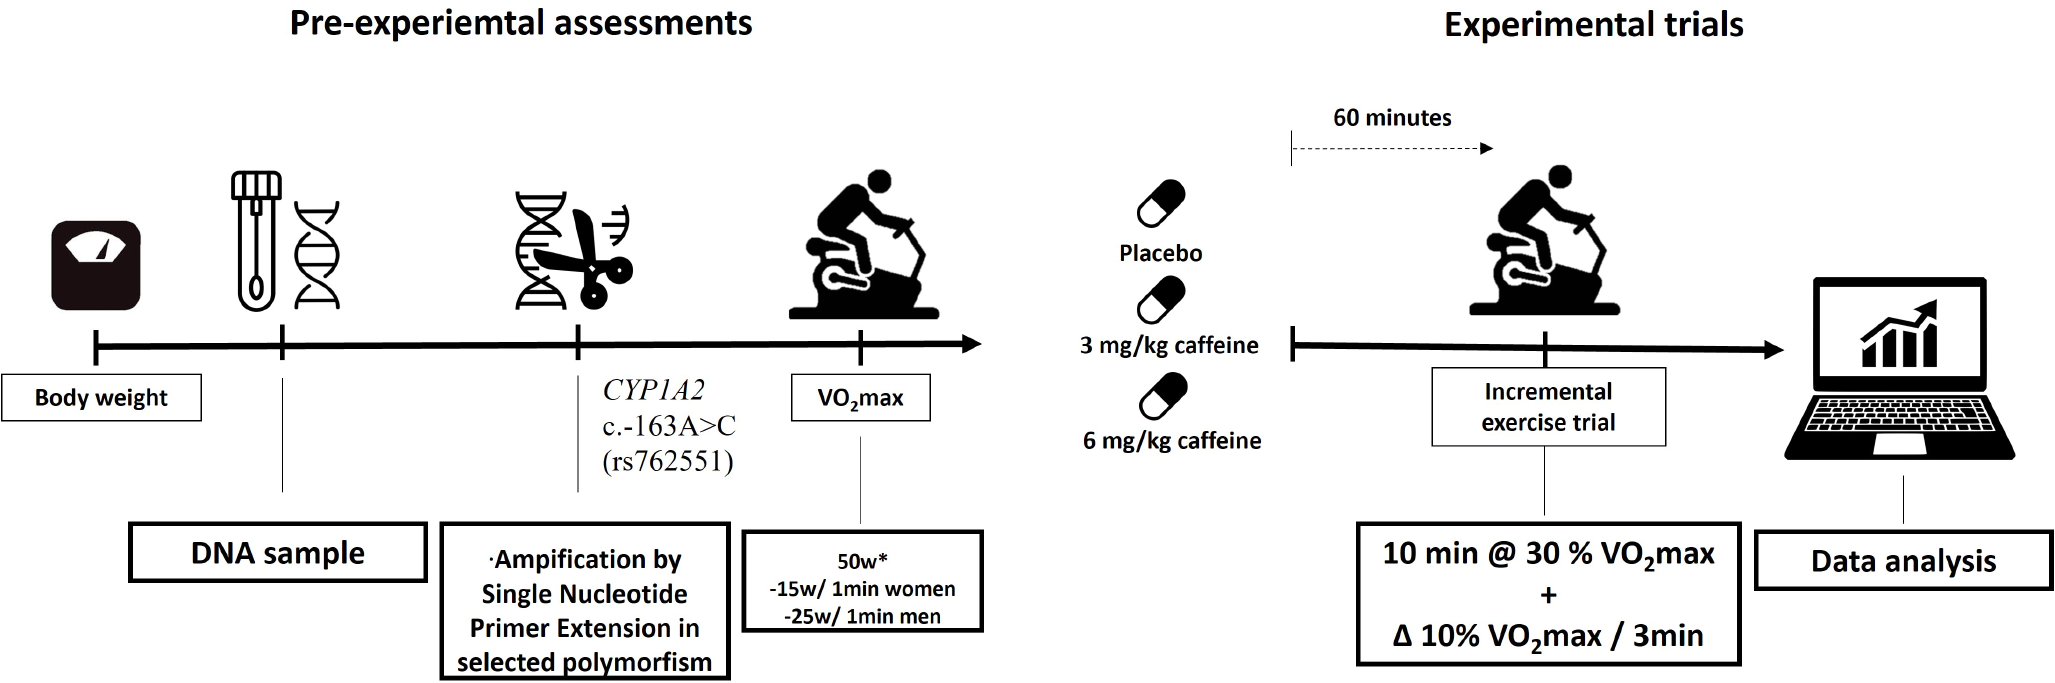 Influence of the CYP1A2 c.-163 A > C polymorphism in the effect of caffeine on fat oxidation during exercise: a pilot randomized, double-blind, crossover, placebo-controlled trial